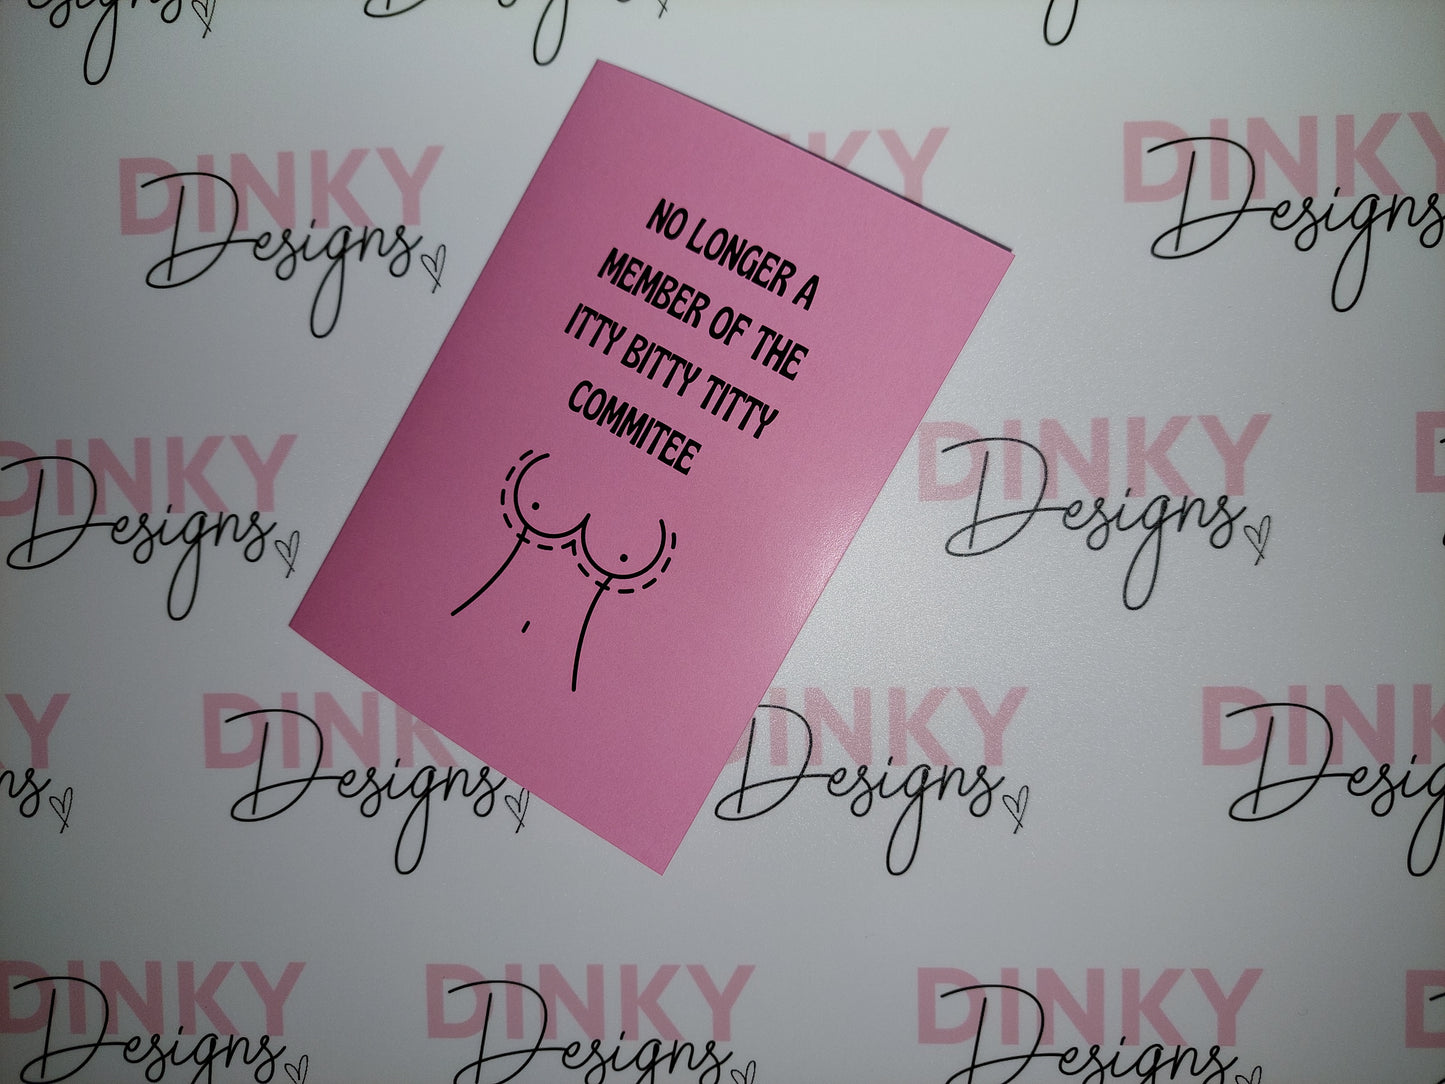 Thinking Of You Card | No Longer A Member Of The Itty Bitty Titty Commitee | Funny Card | Boob Job Card